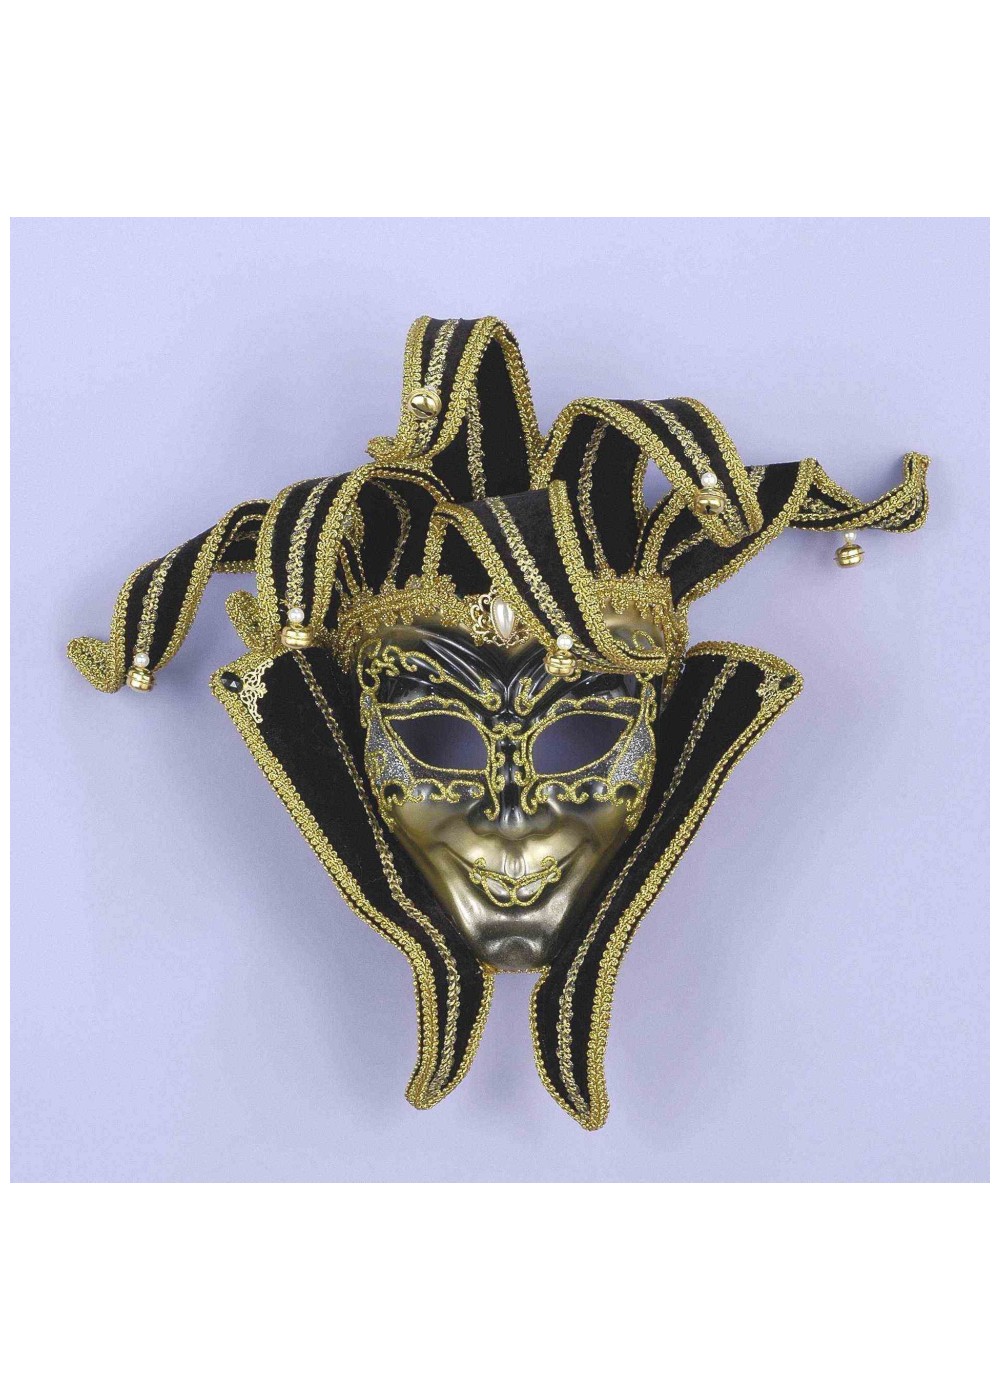 Black And Gold Jester Venetian Mask